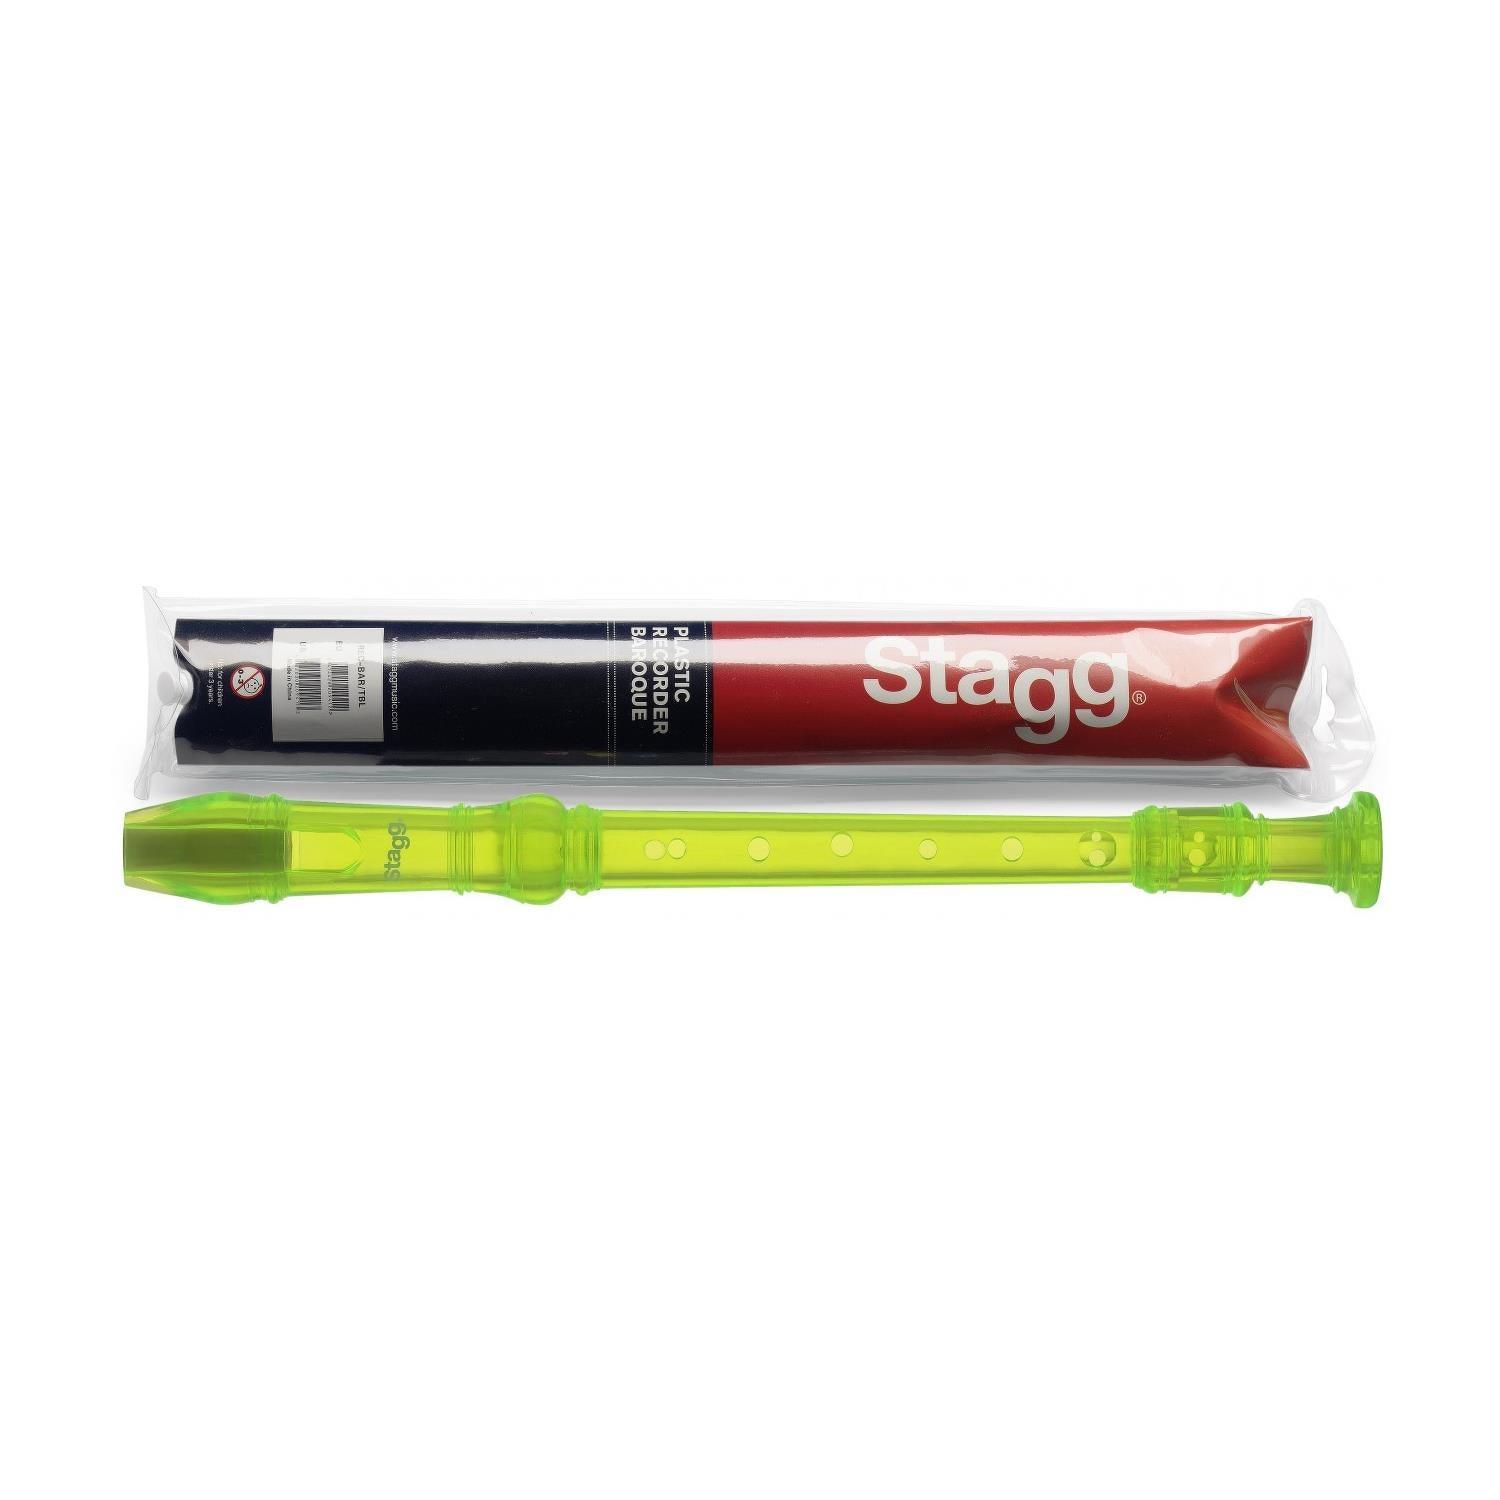 Stagg REC-BAR/TGR Soprano Recorder with Baroque Fingering Green - DY Pro Audio